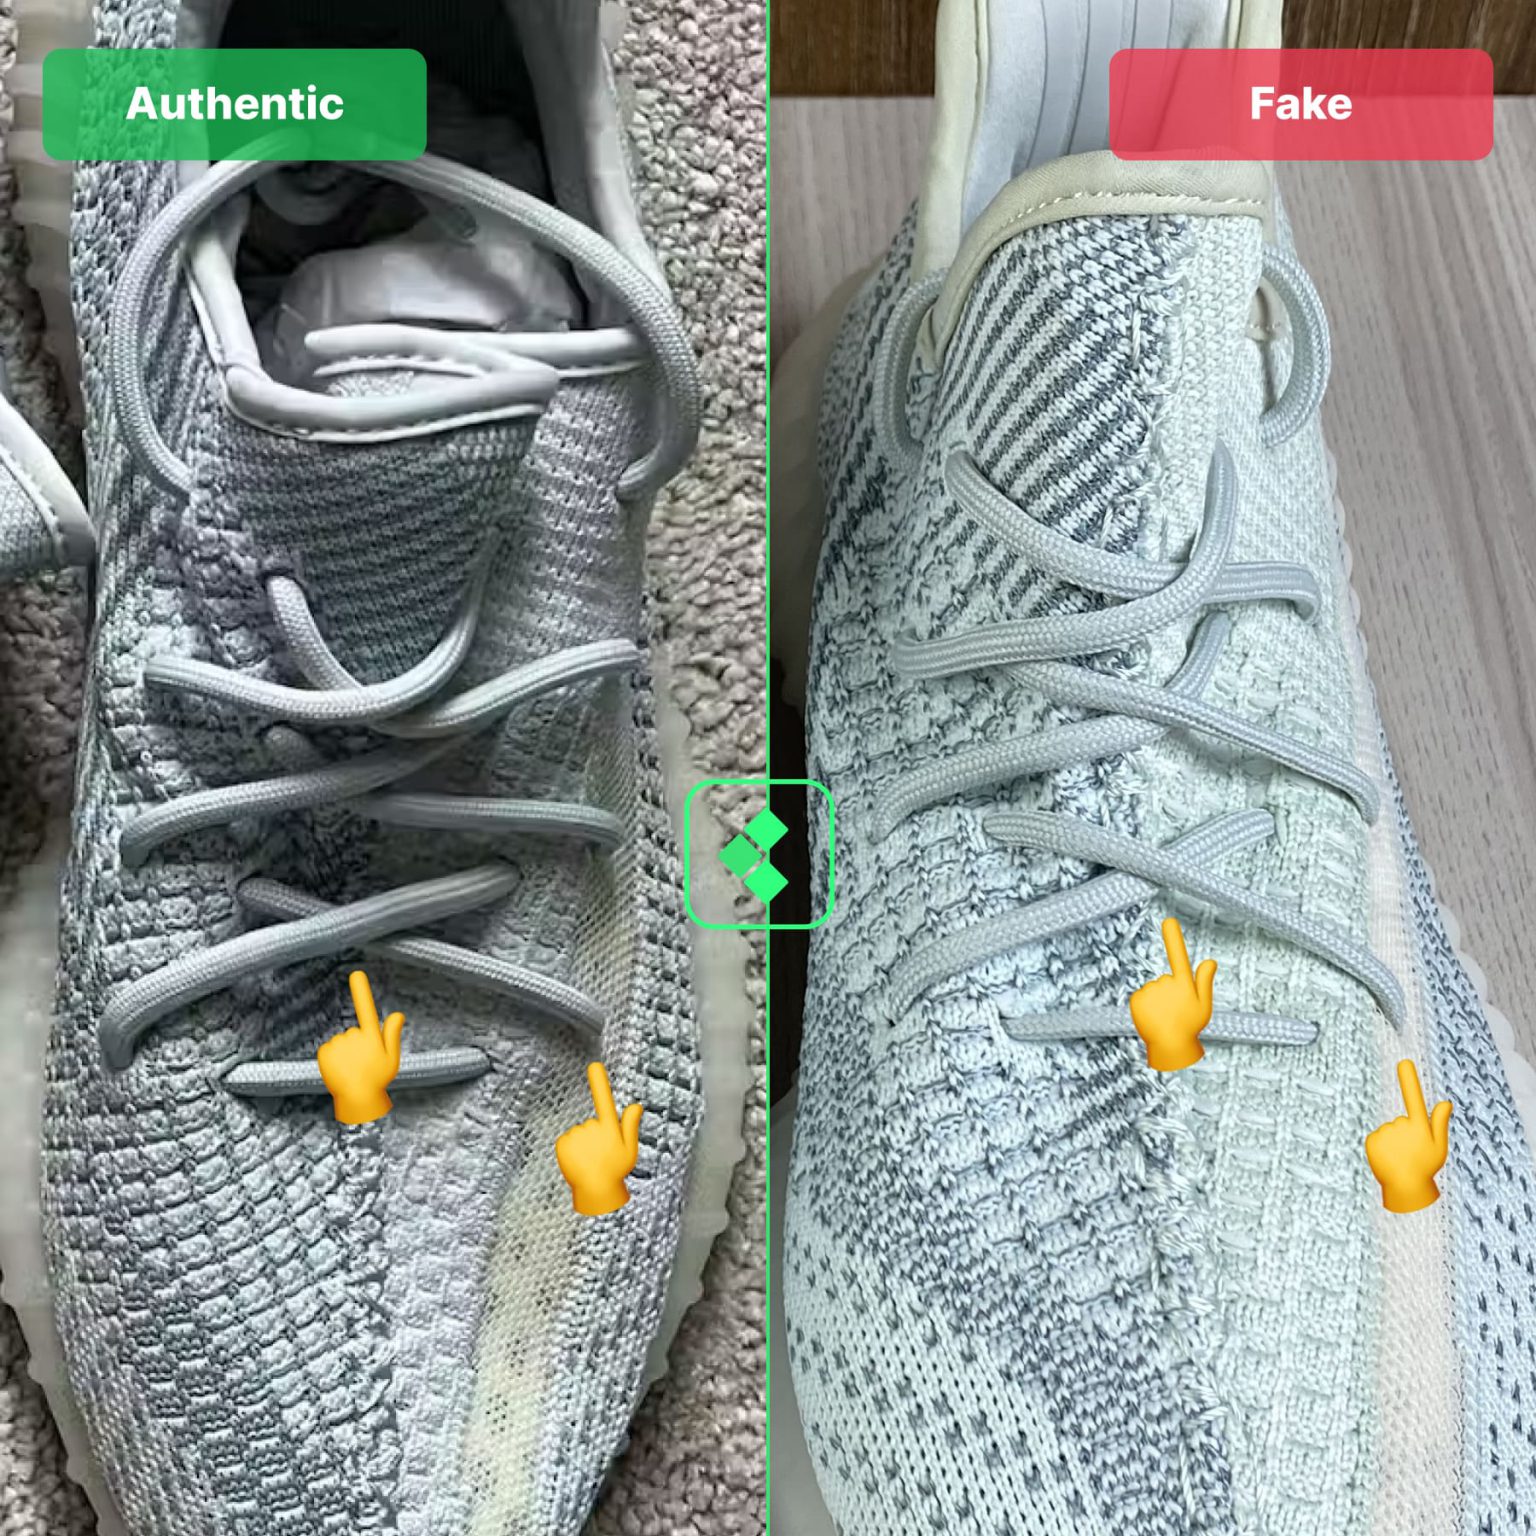 How To Spot Fake Yeezy Boost 350 V2 Cloud White